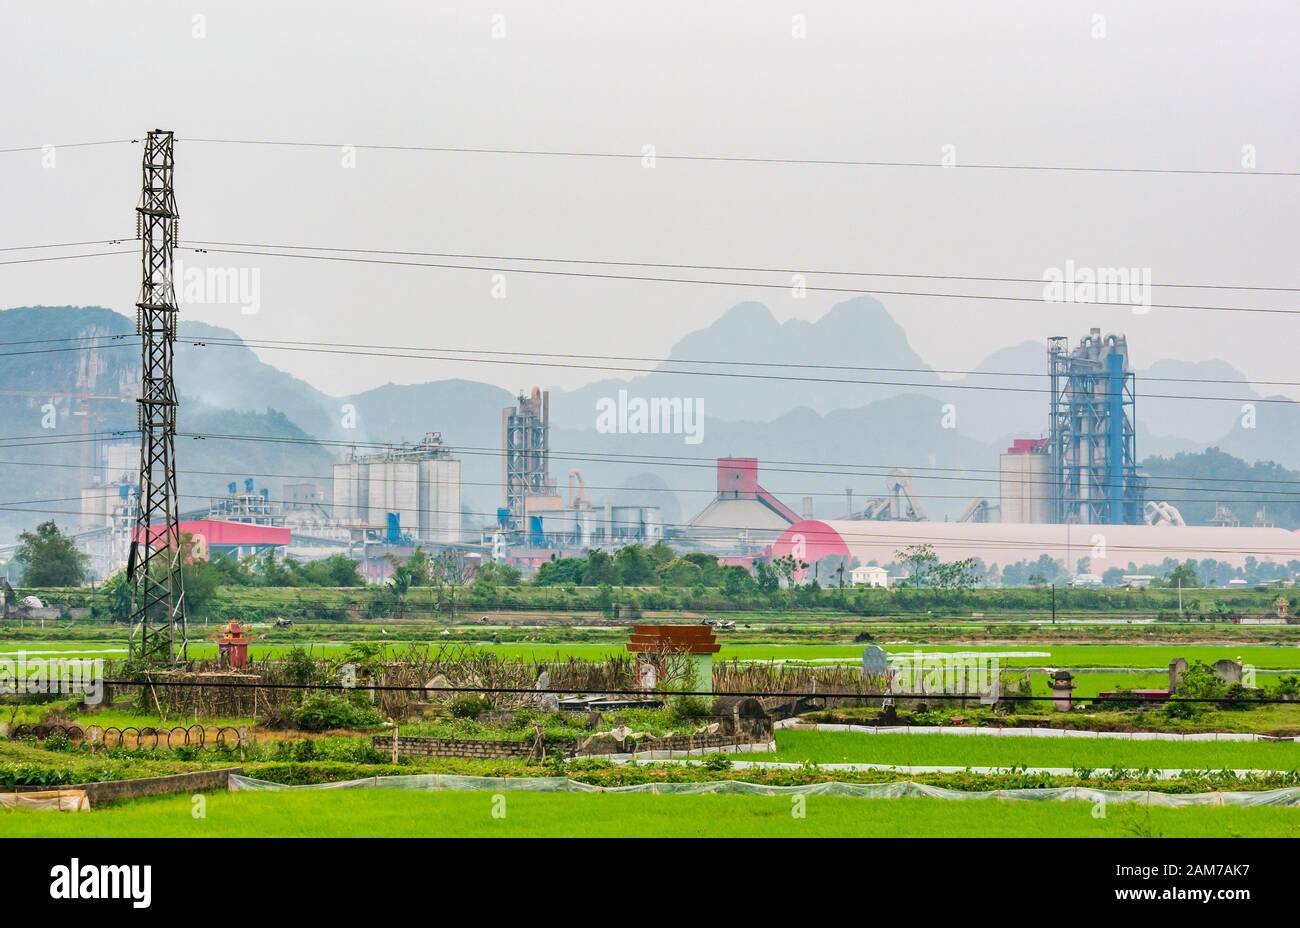 Industrial limestone quarry with rice paddy fields and ancestral graves, Ninh Binh, Vietnam, Asia Stock Photo